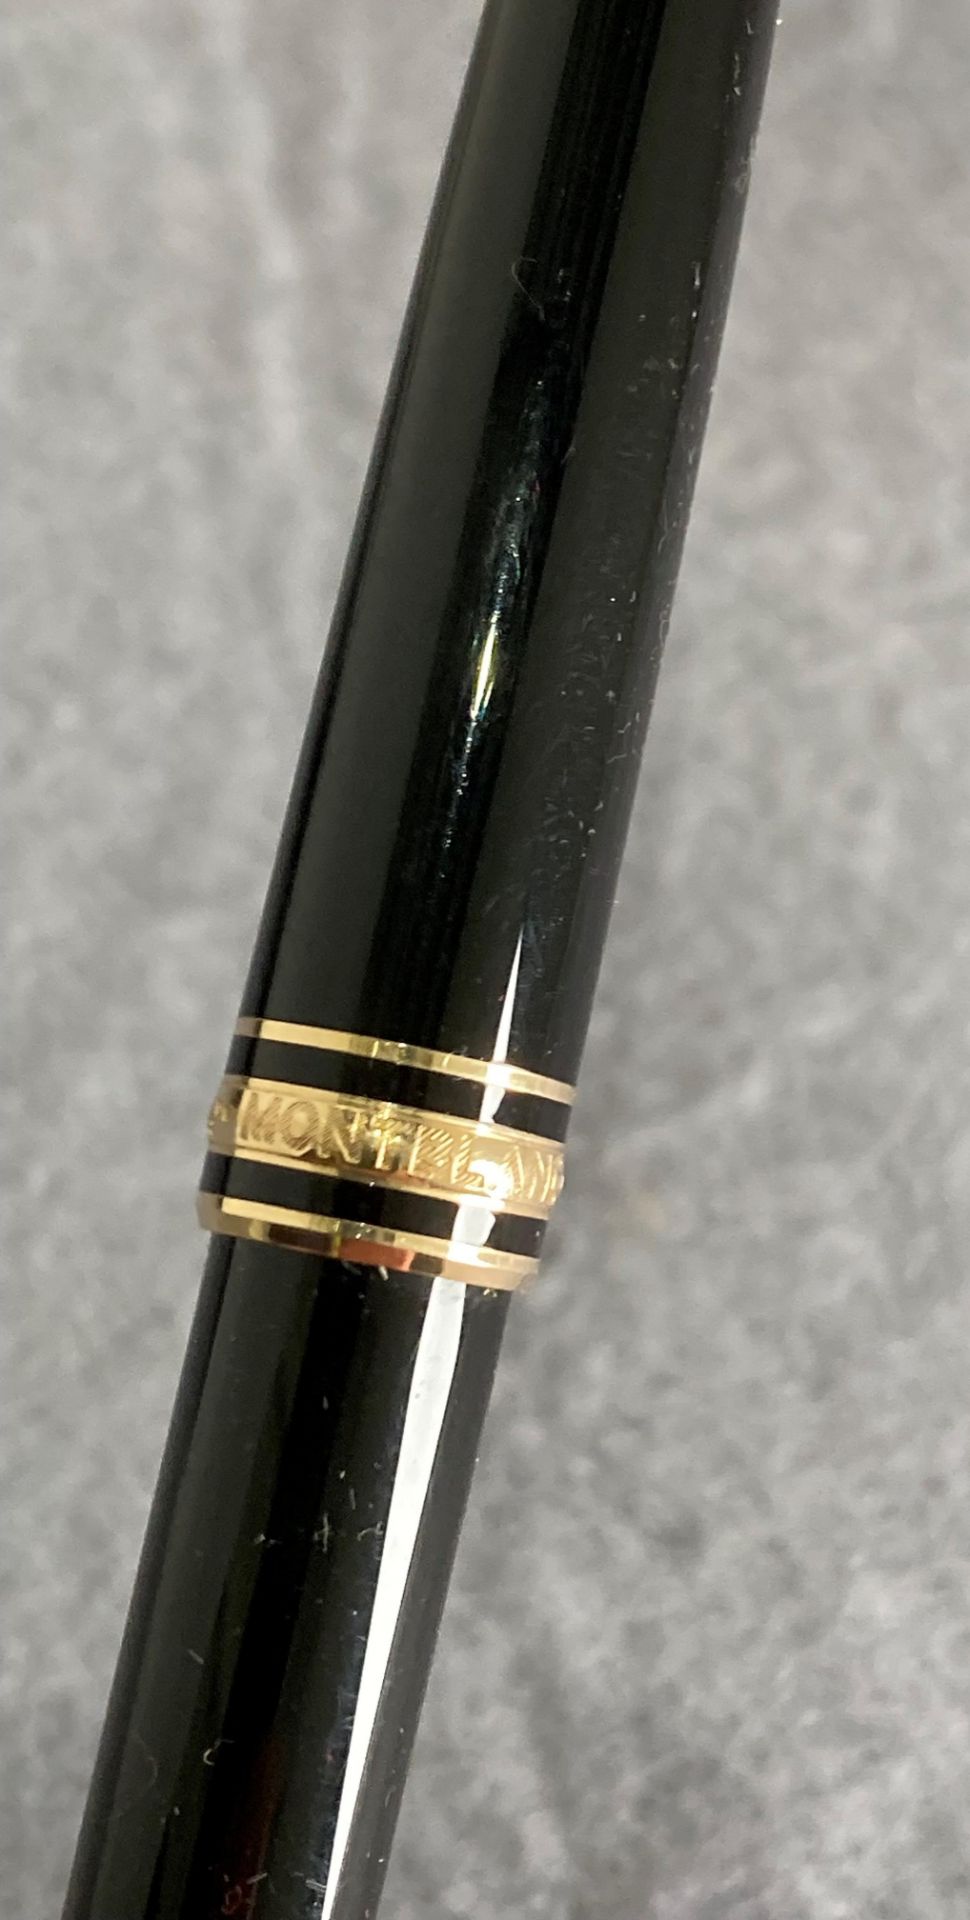 Montblanc-Meisterstuck gold-coated Classique Mechanical Pencil no: EY1492310 Germany, - Image 2 of 4